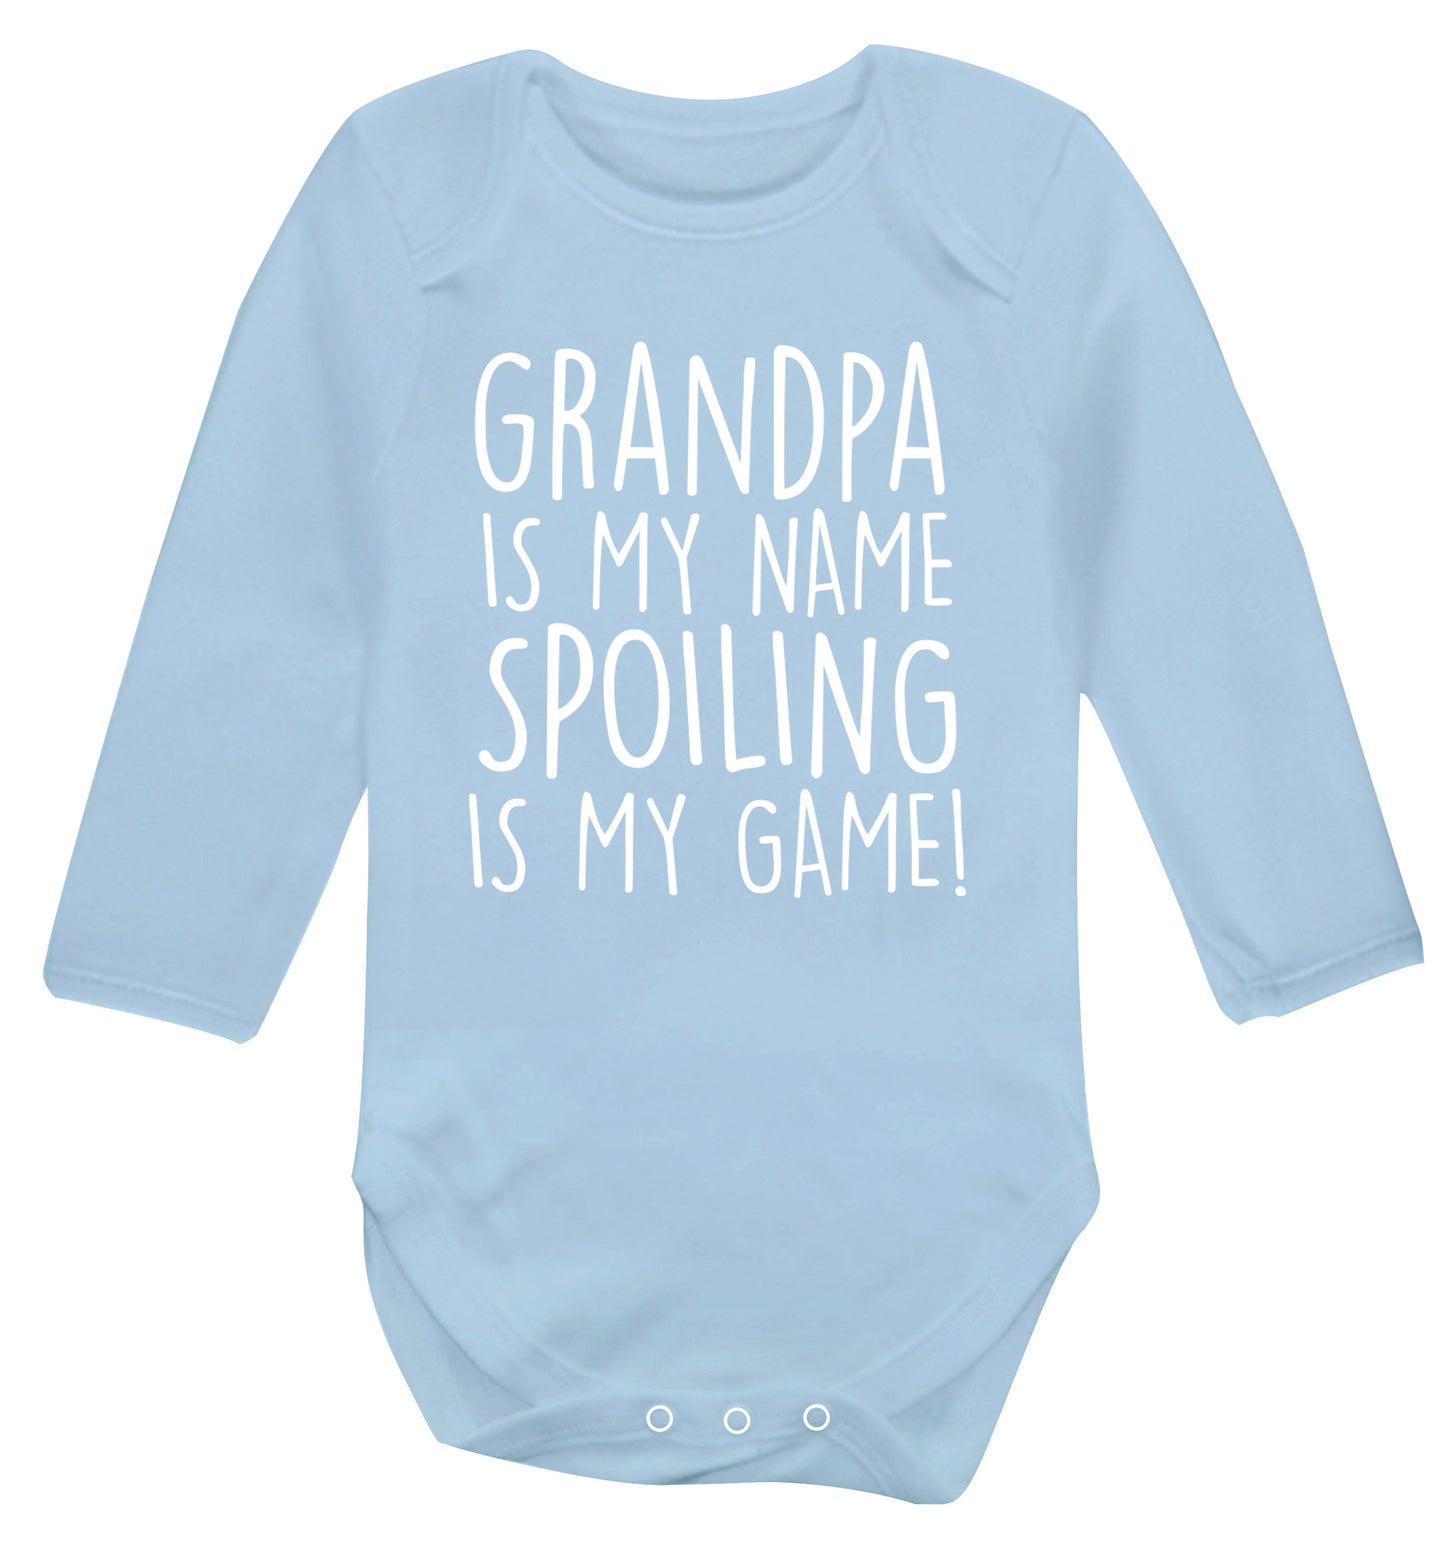 Grandpa is my name, spoiling is my game Baby Vest long sleeved pale blue 6-12 months